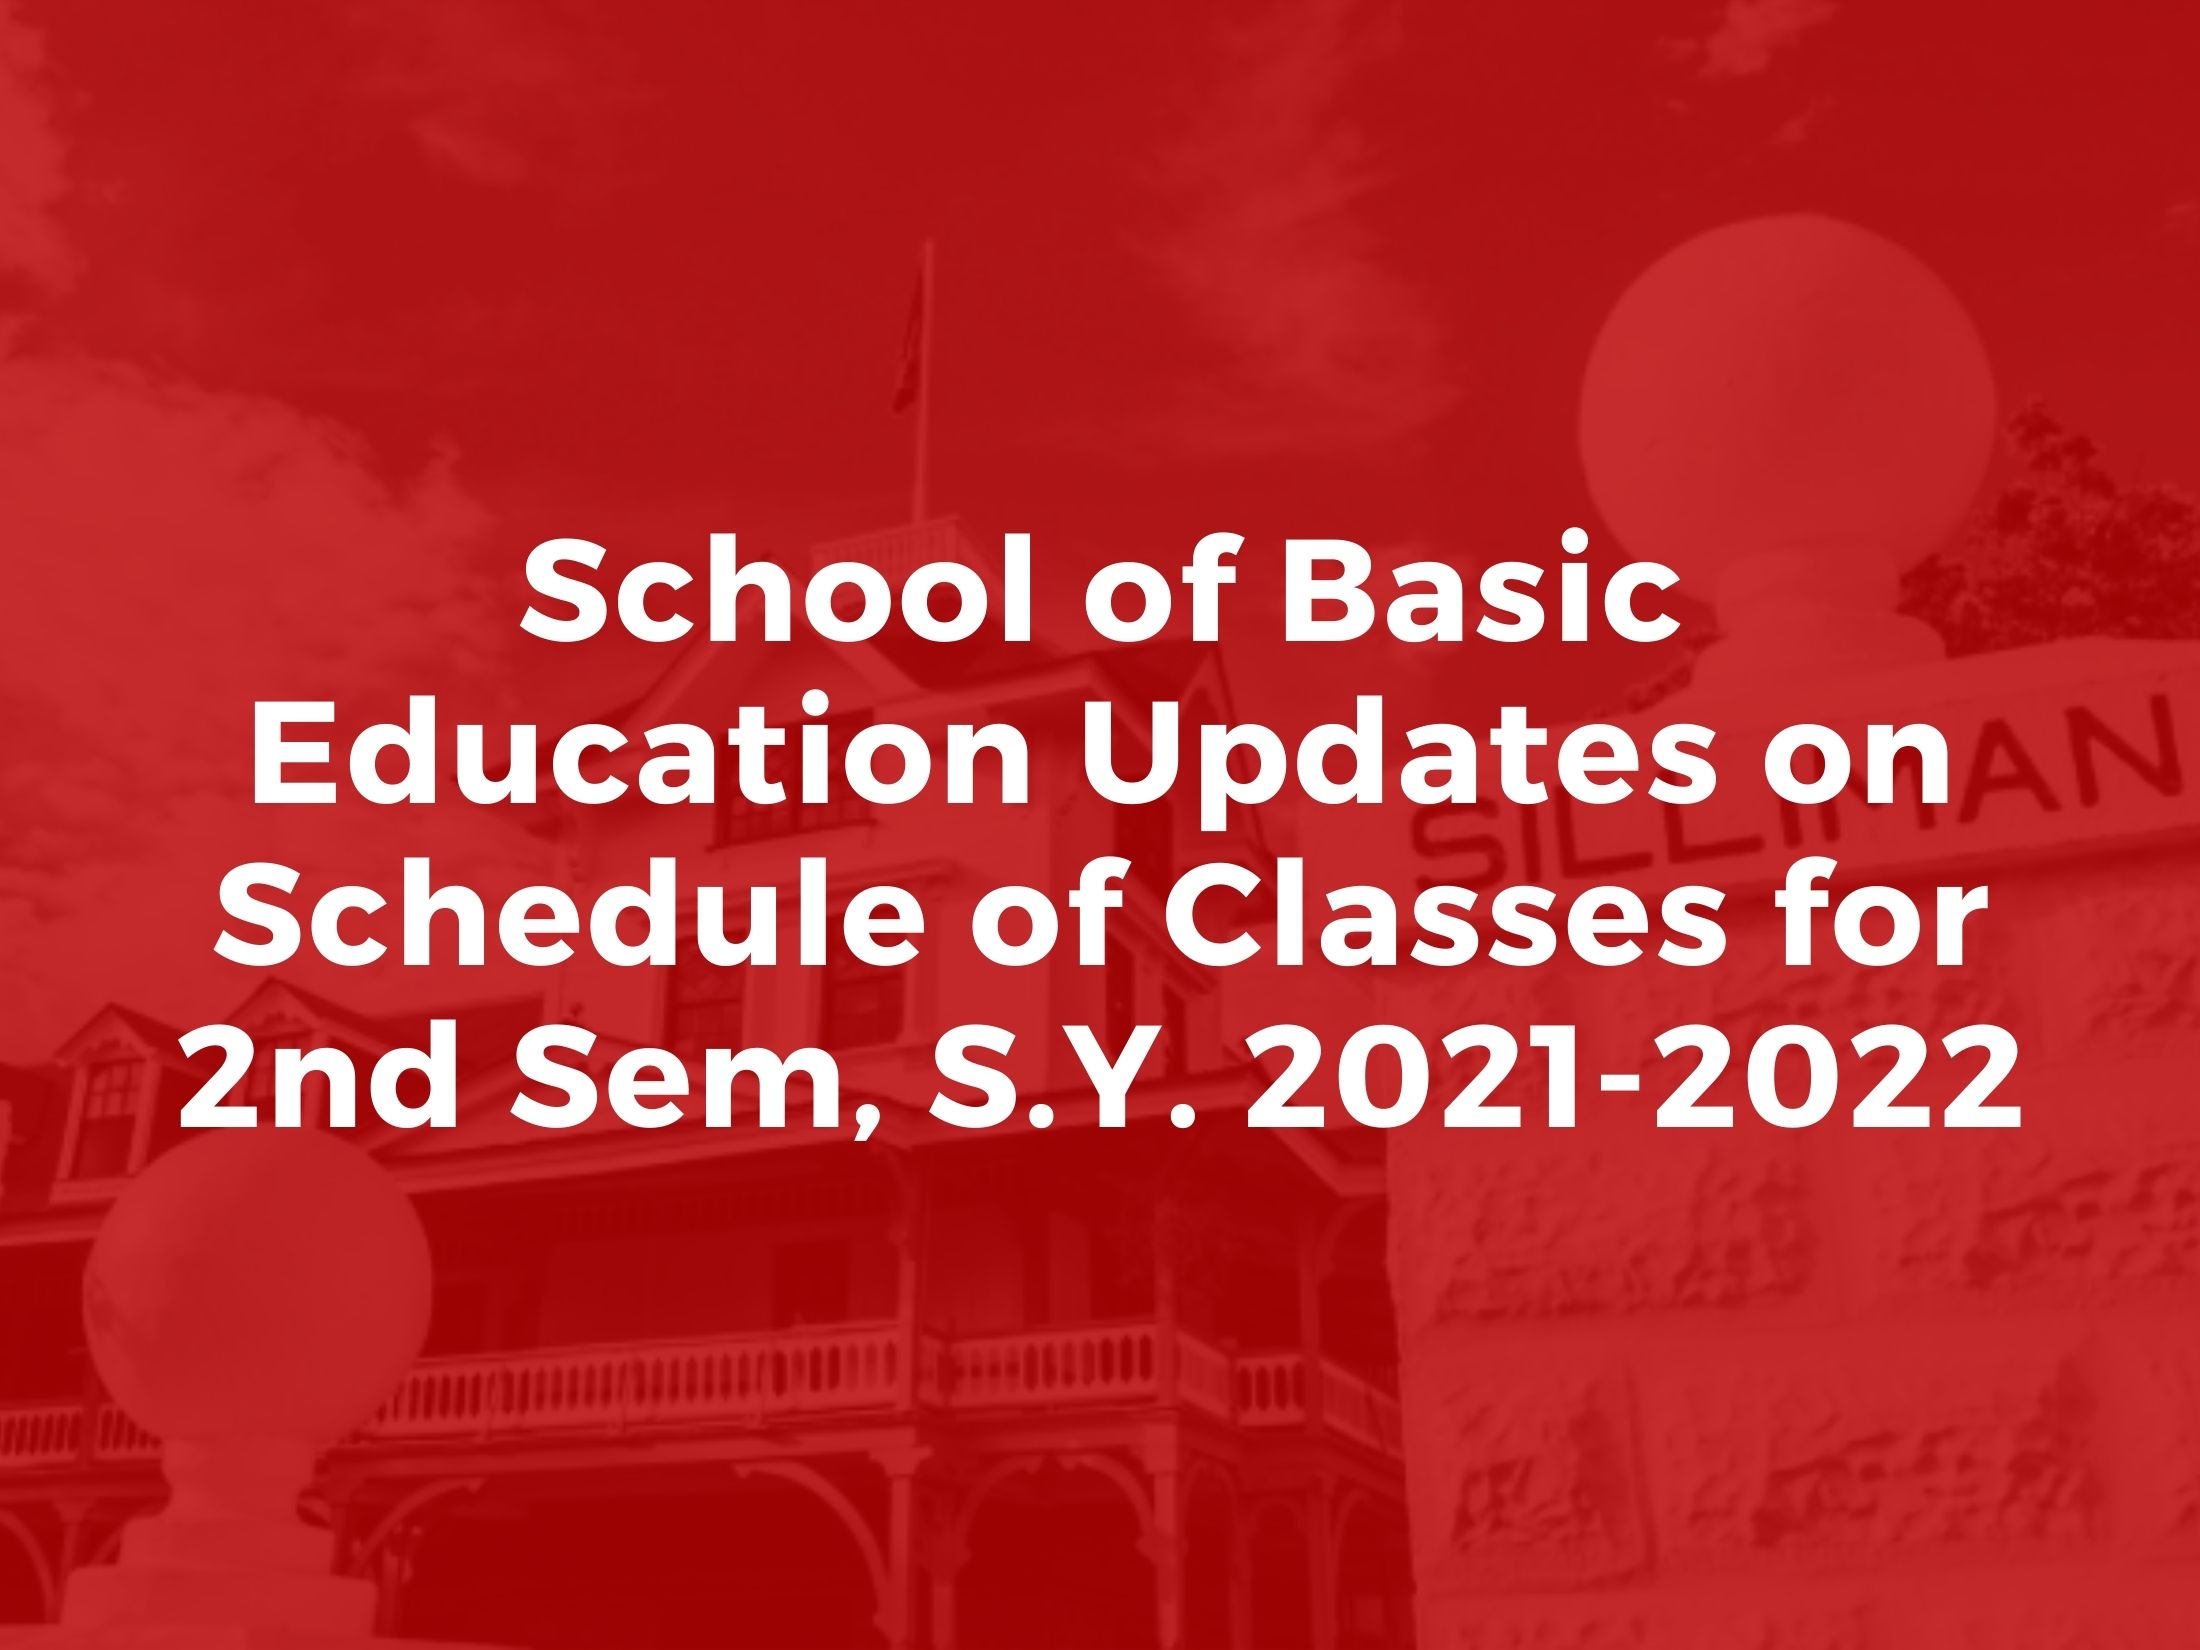 ANNOUNCEMENT: School of Basic Education Updates on Schedule of Classes for 2nd Sem, S.Y. 2021-2022